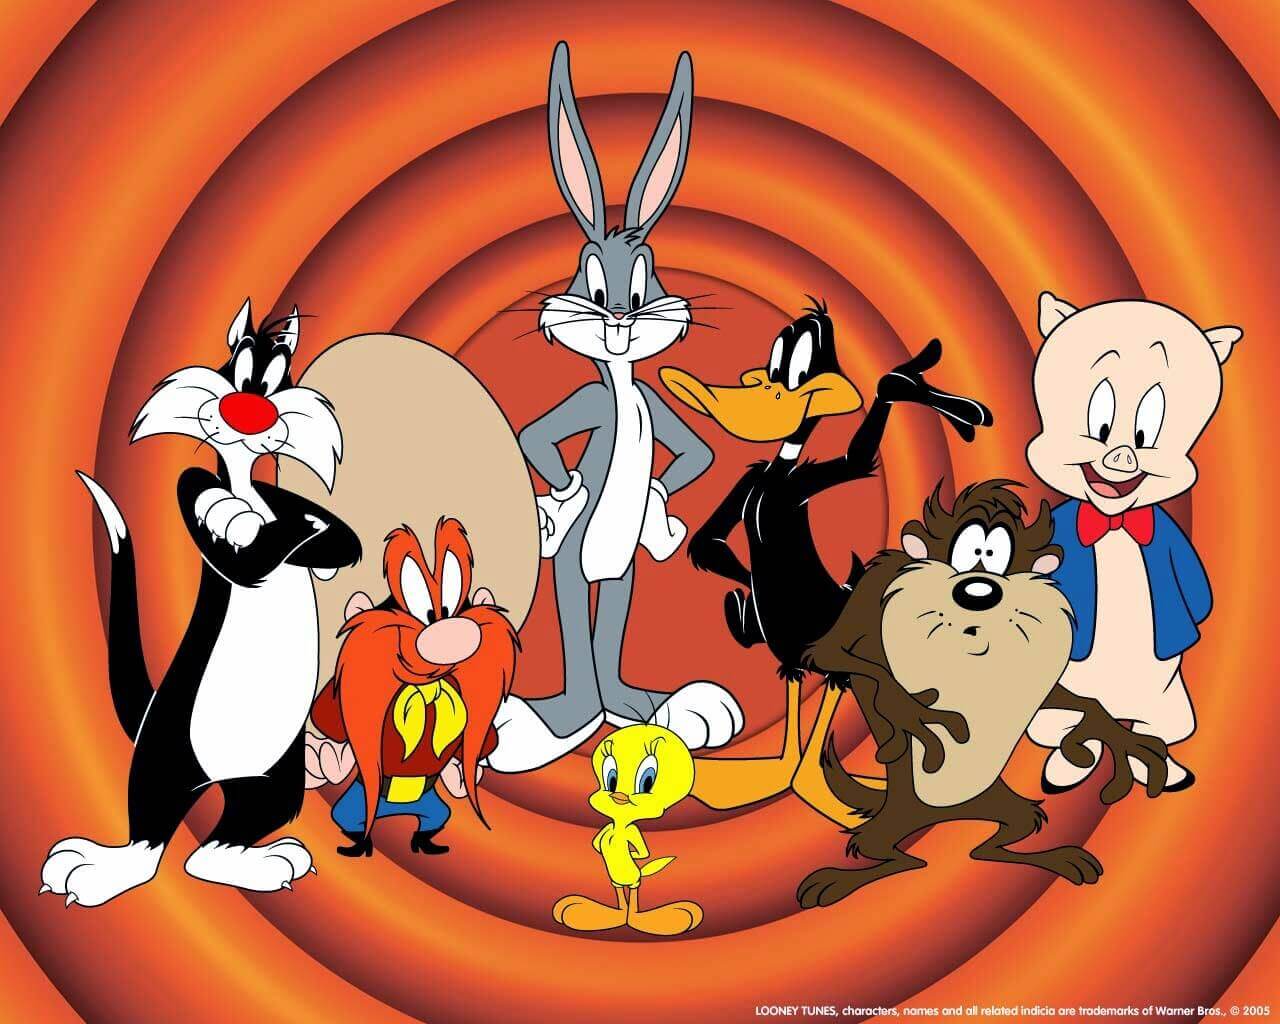 The Looney Toons cast includes a black and white cat.